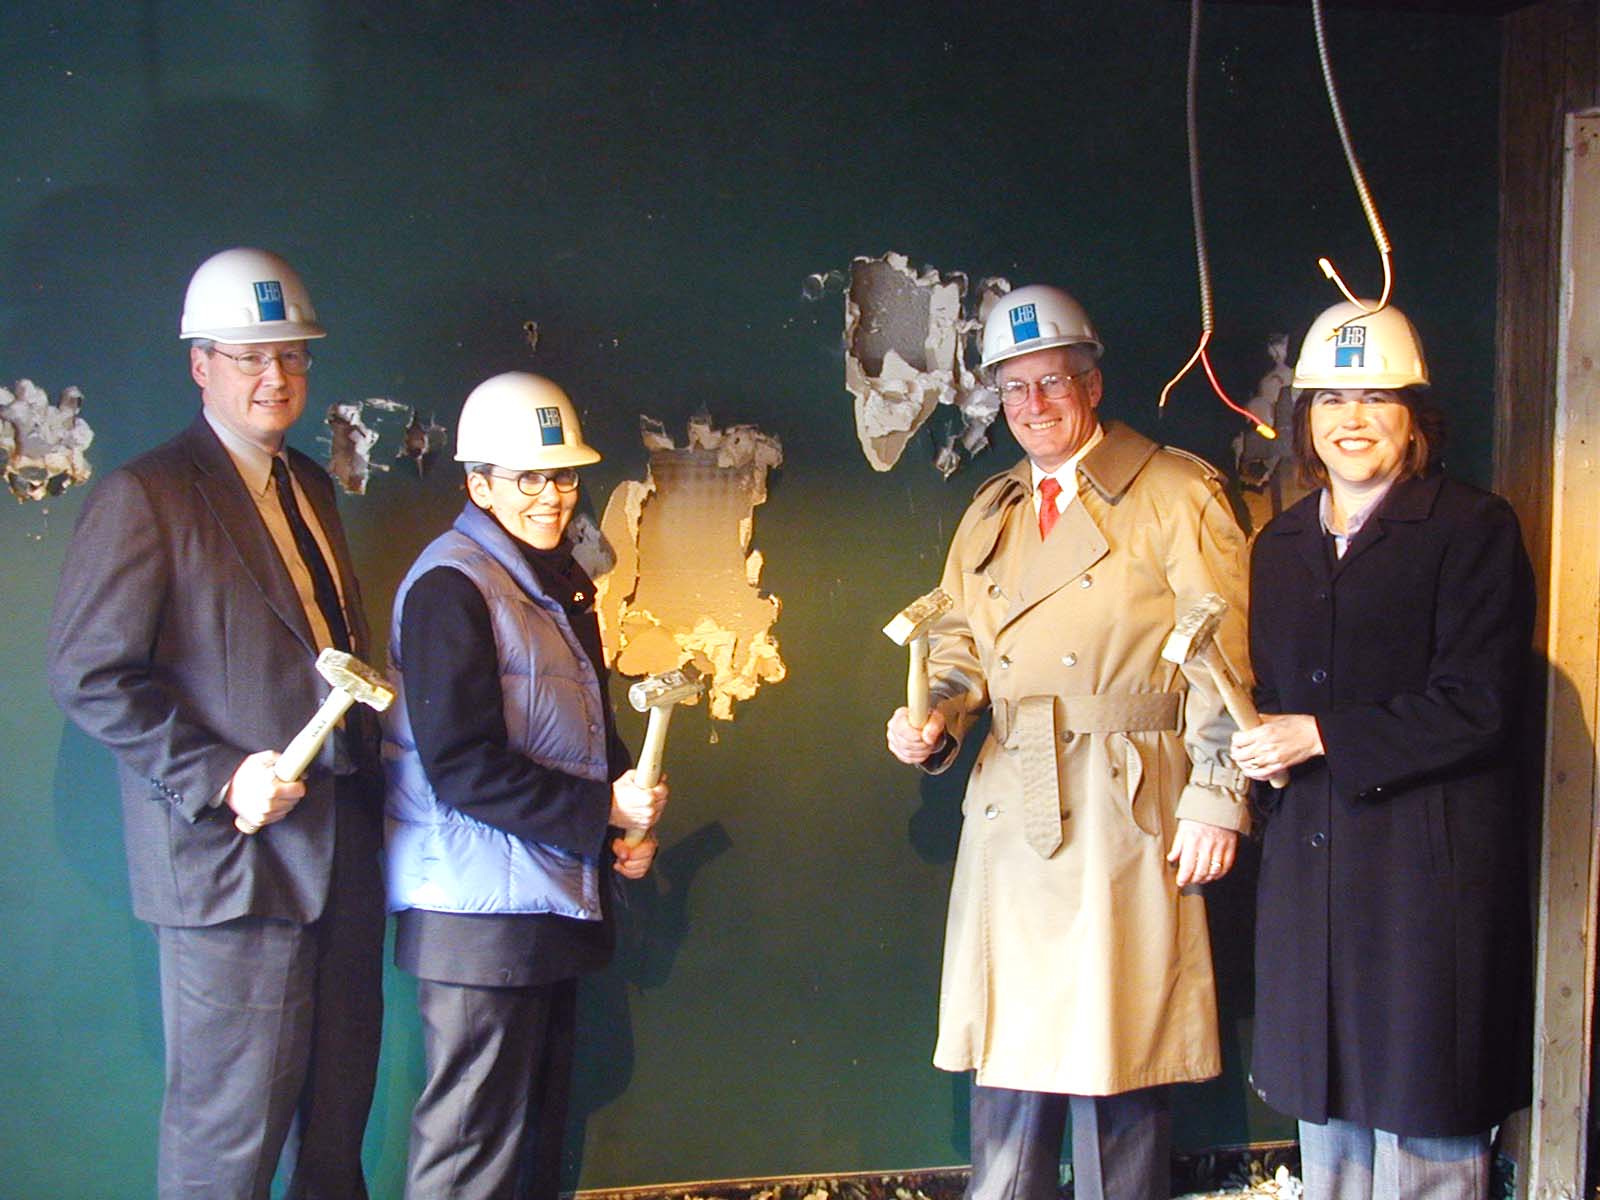 Four people wearing construction helmets pose with hammers in front of a wall with exposed studs and broken drywall. Dressed in business attire, one sports a trench coat and another a blue vest, giving the scene of this Whole Foods Coop Duluth MN event a unique blend of professionalism and construction spirit.